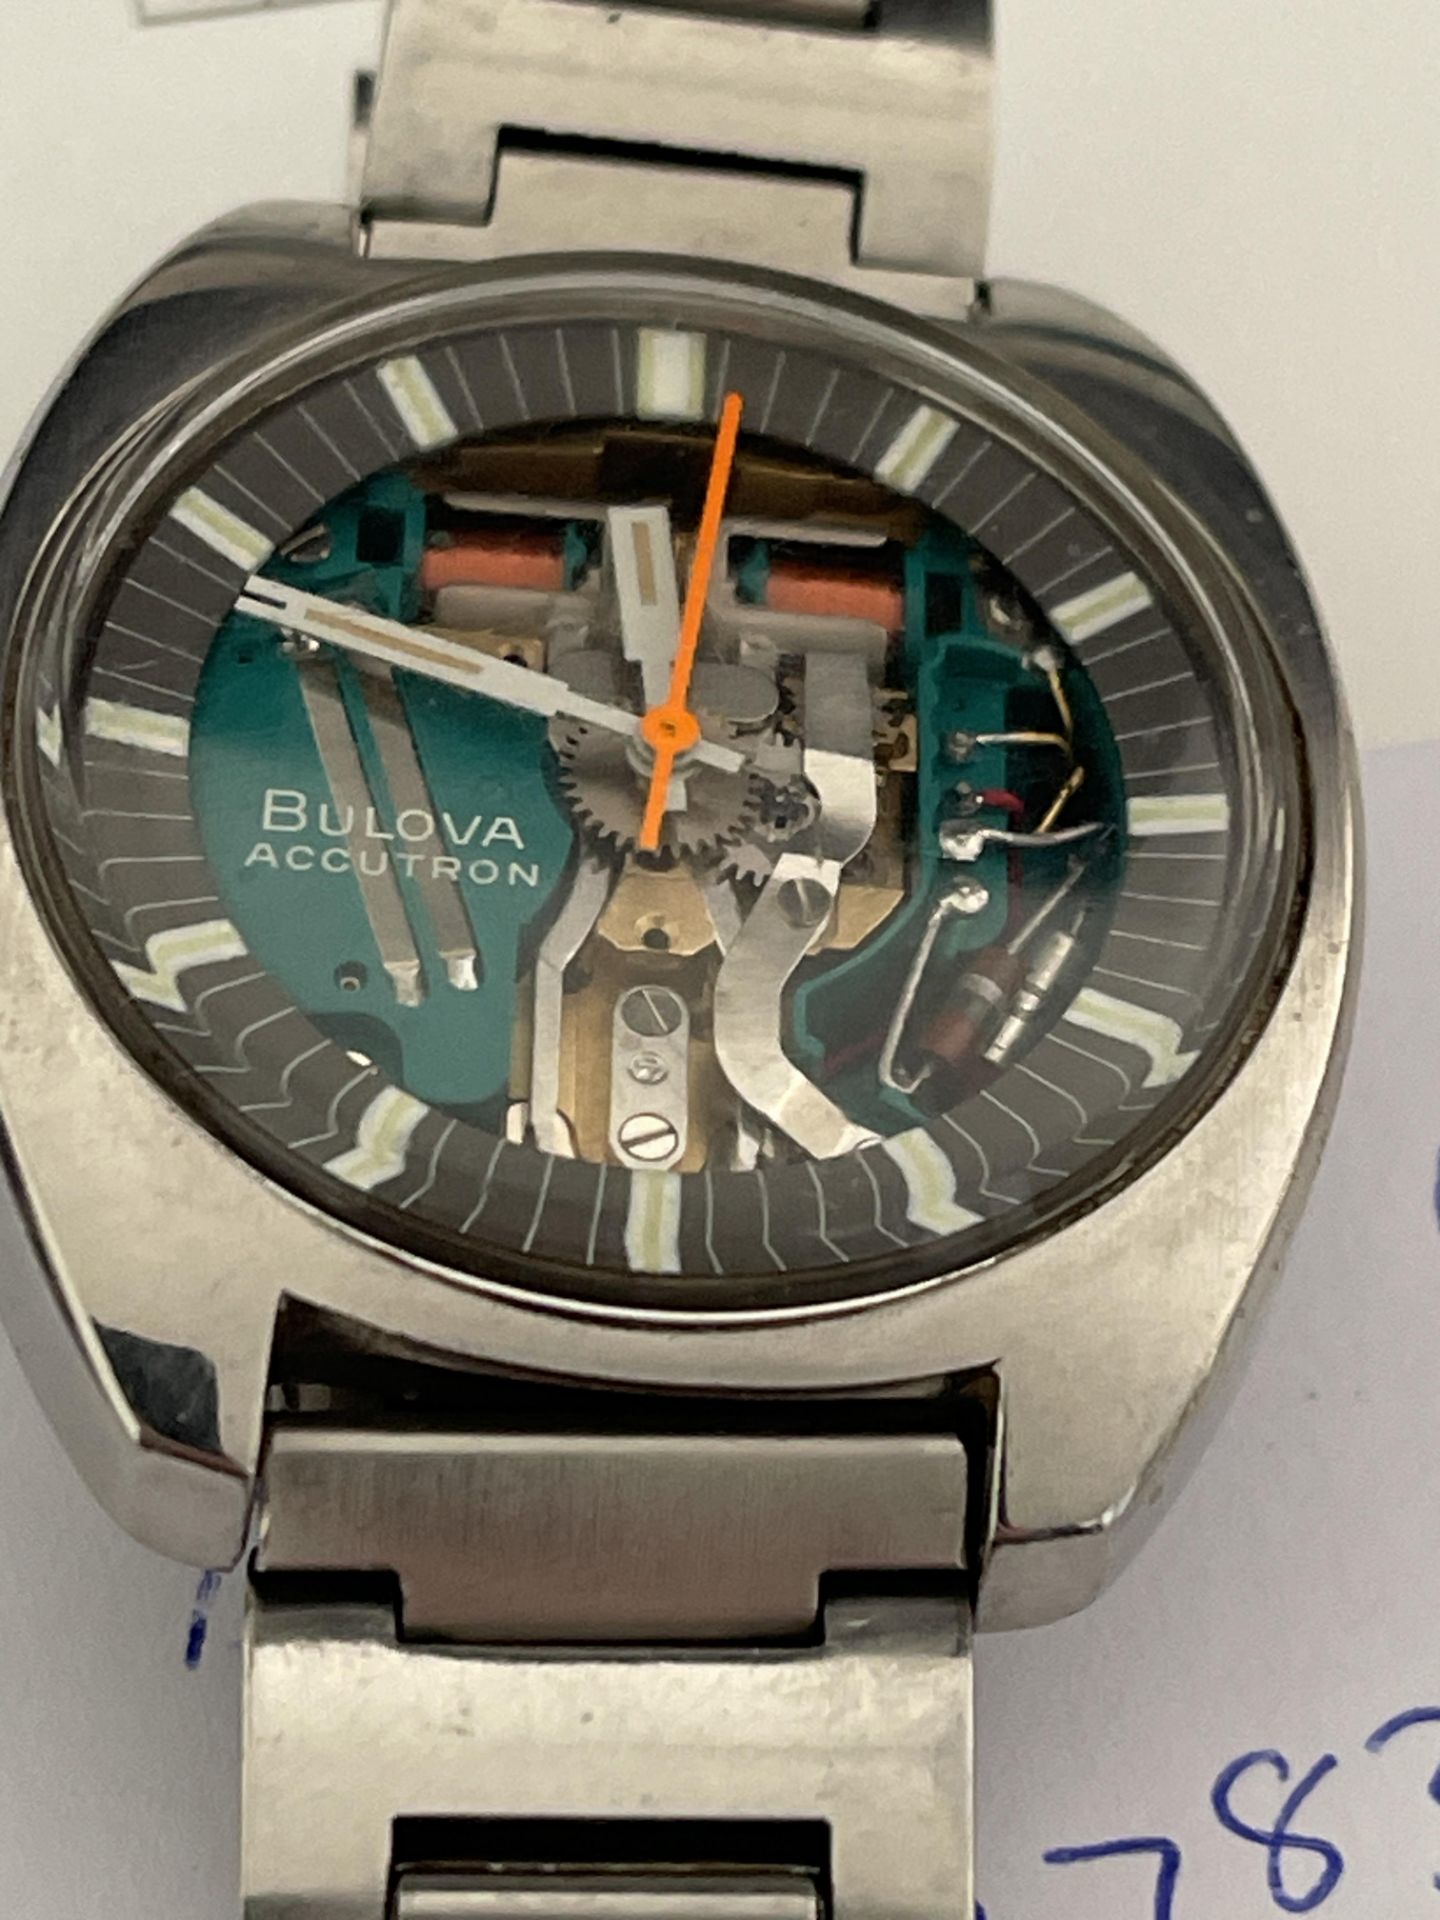 The Bulova Accutron space view watch fully working - Image 2 of 4